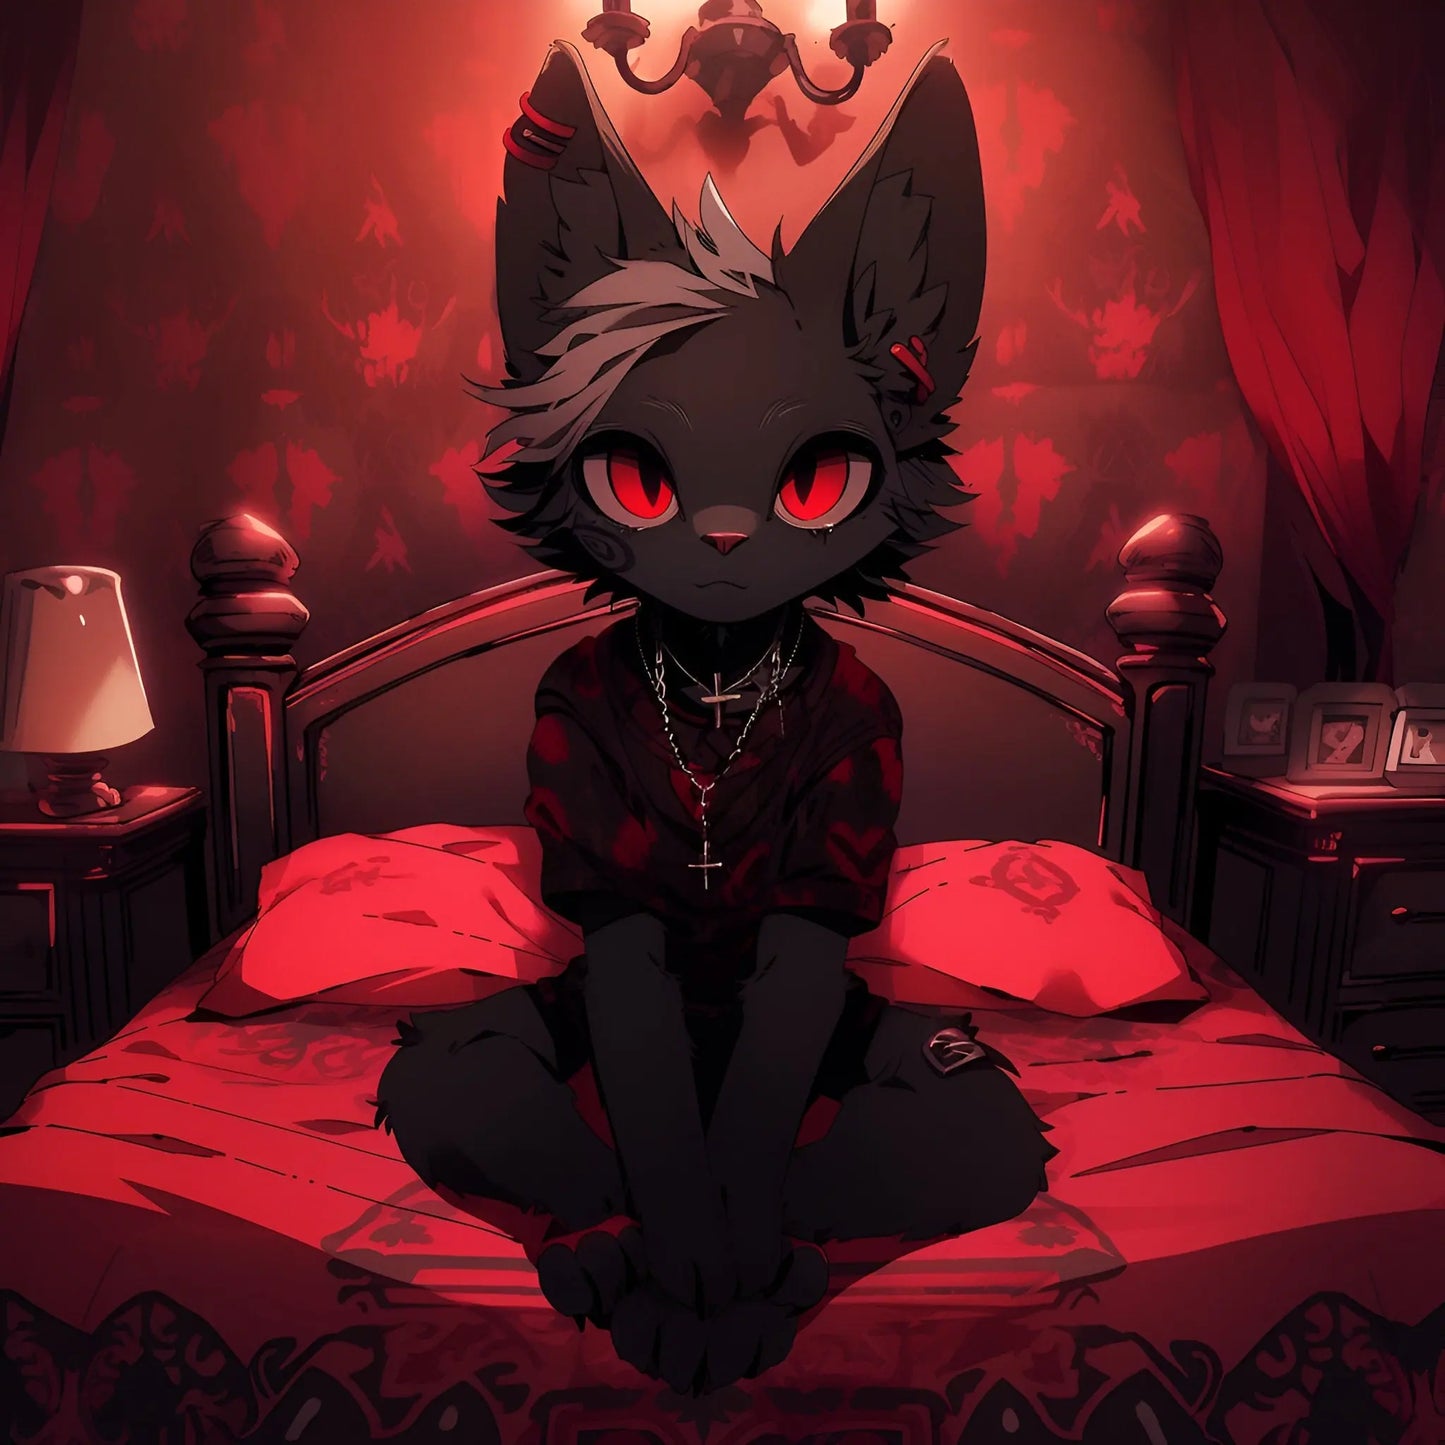 YCH Goth Boyfriend Girlfriend Anthro, Furry, Feral, Fursona Con Badge Custom Art Character Profile Image or Icon [YCH in our Goth Bedroom] My Store